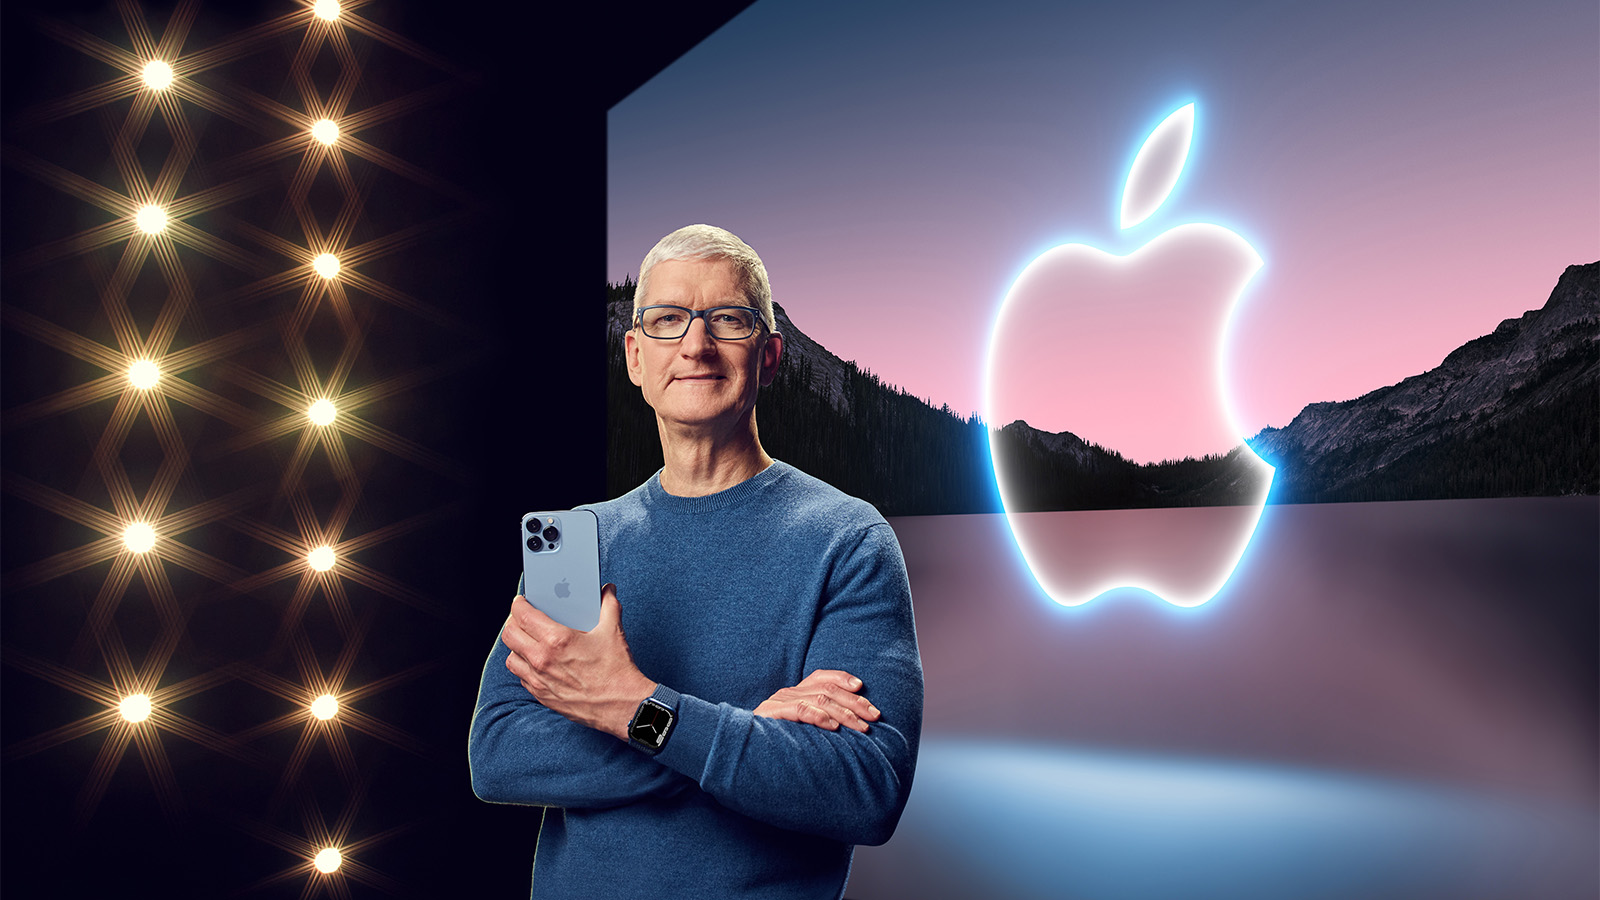 Apple has already started filming the presentation of the iPhone 14 and Apple Watch Series 8 - Bloomberg